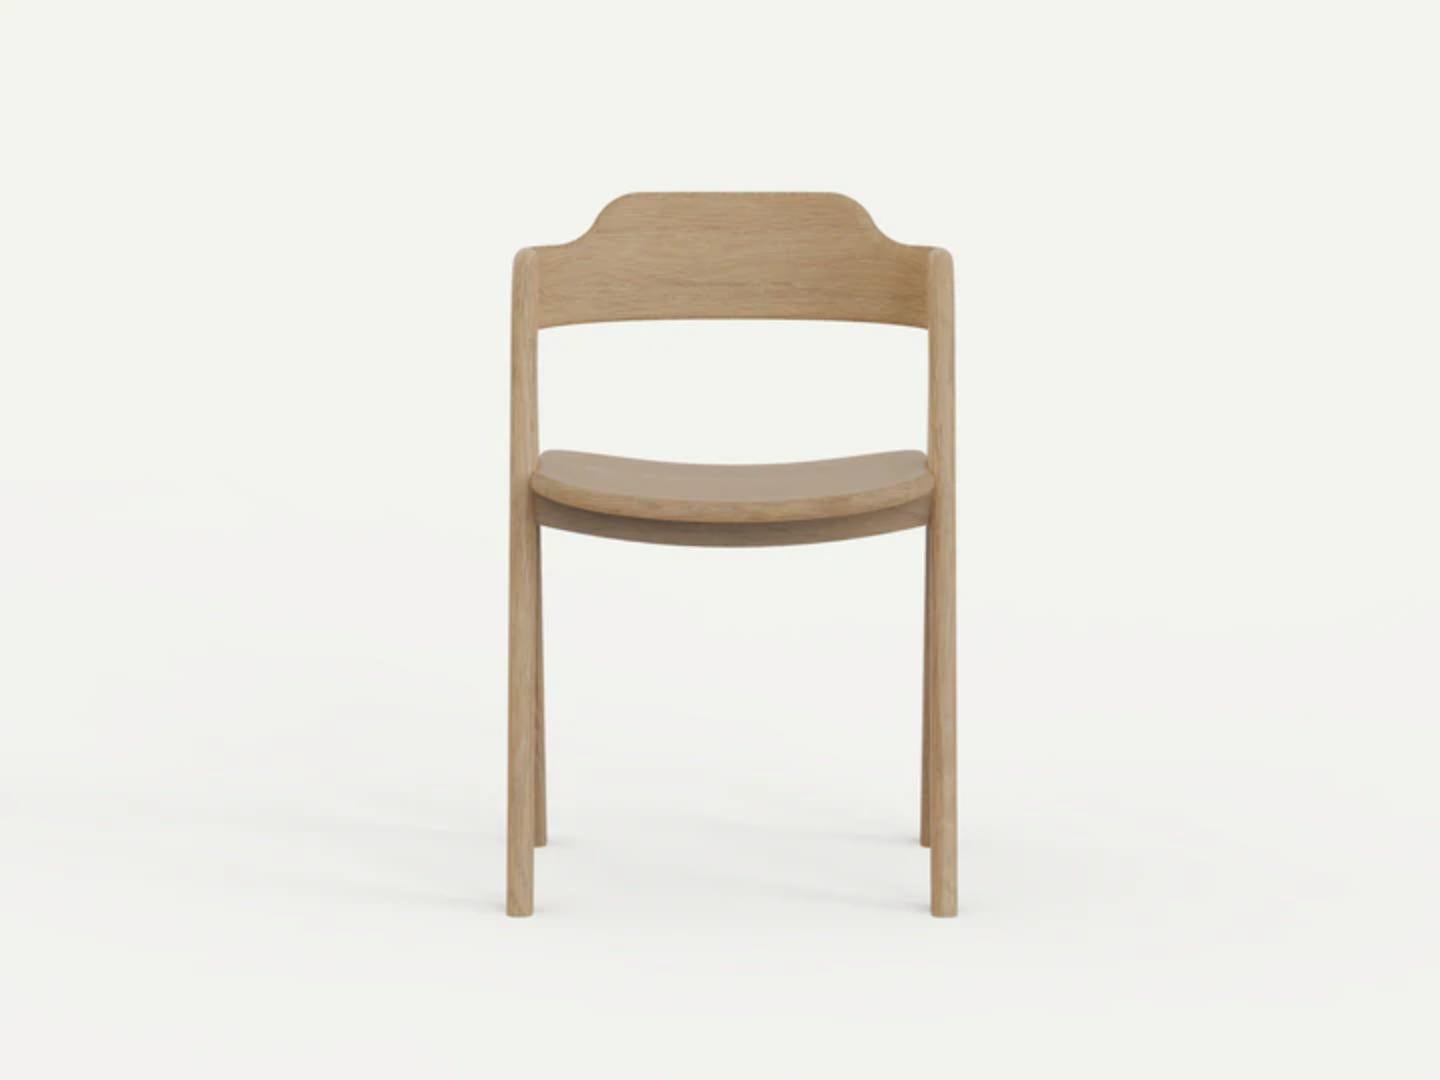 Balance chair by Sebastián Angeles
Material: Walnut
Dimensions: W 40 x D 40 x 100 cm
Also Available: Other colors available,

The love of processes, the properties of materials, details and concepts make Dorica Taller a study not only of